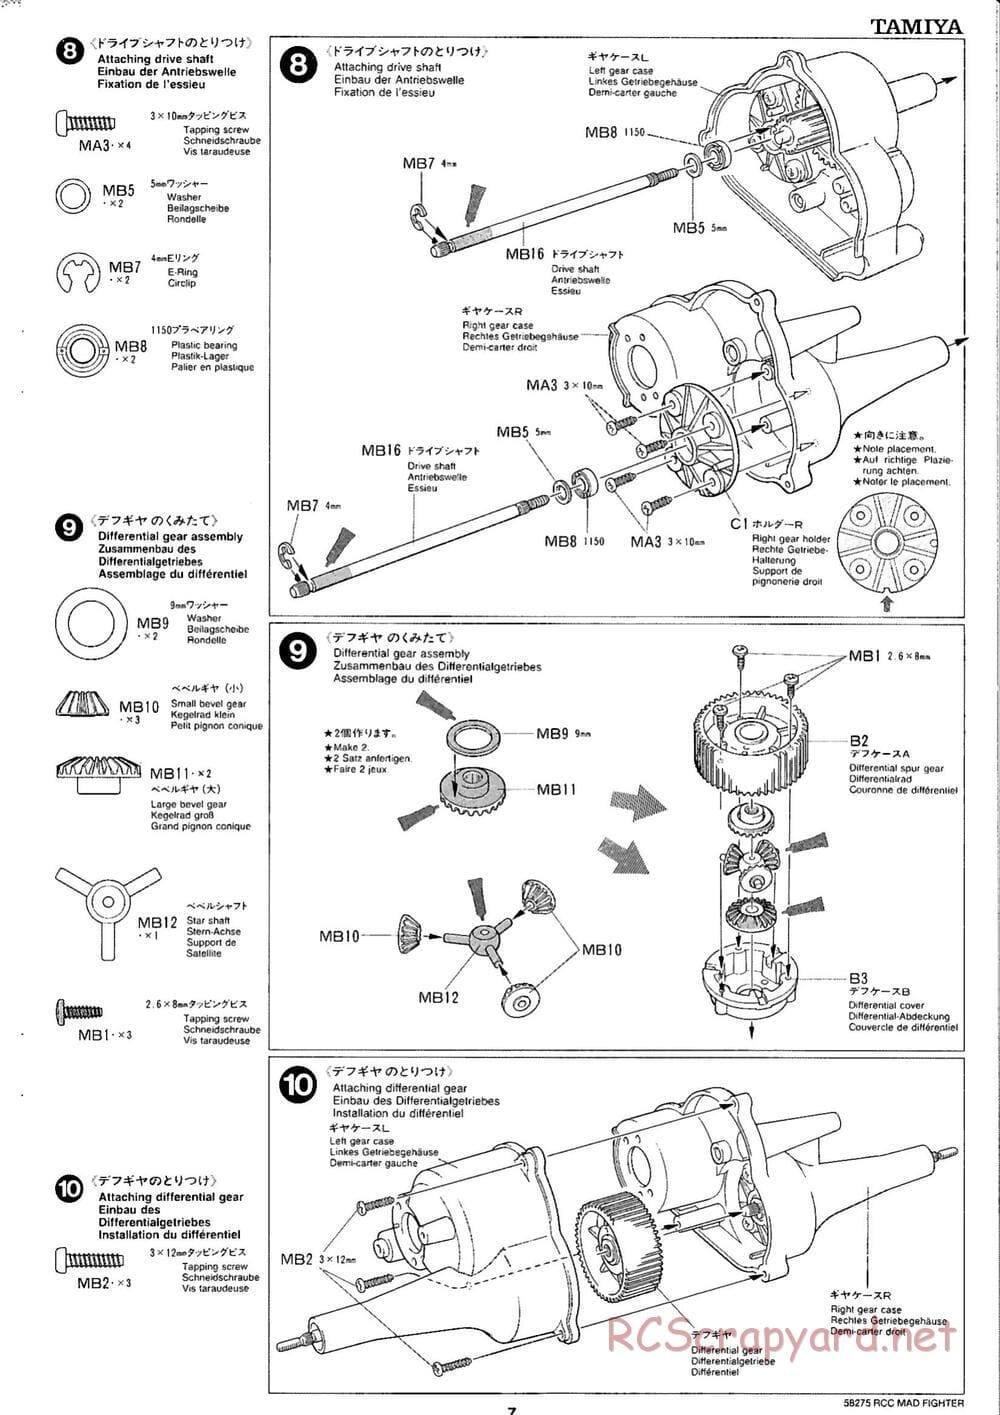 Tamiya - Mad Fighter Chassis - Manual - Page 7